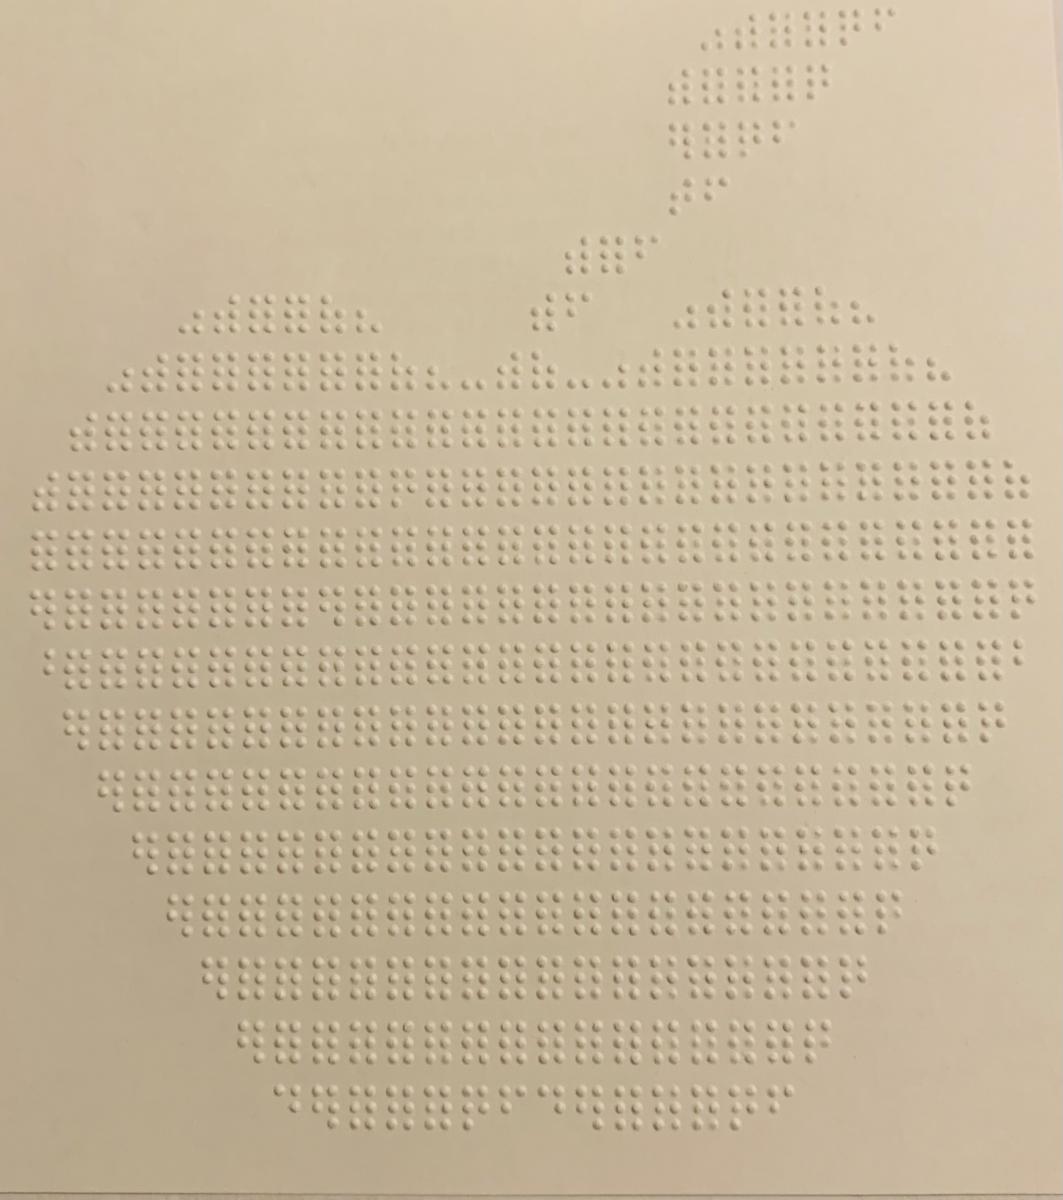 Braille design of an apple